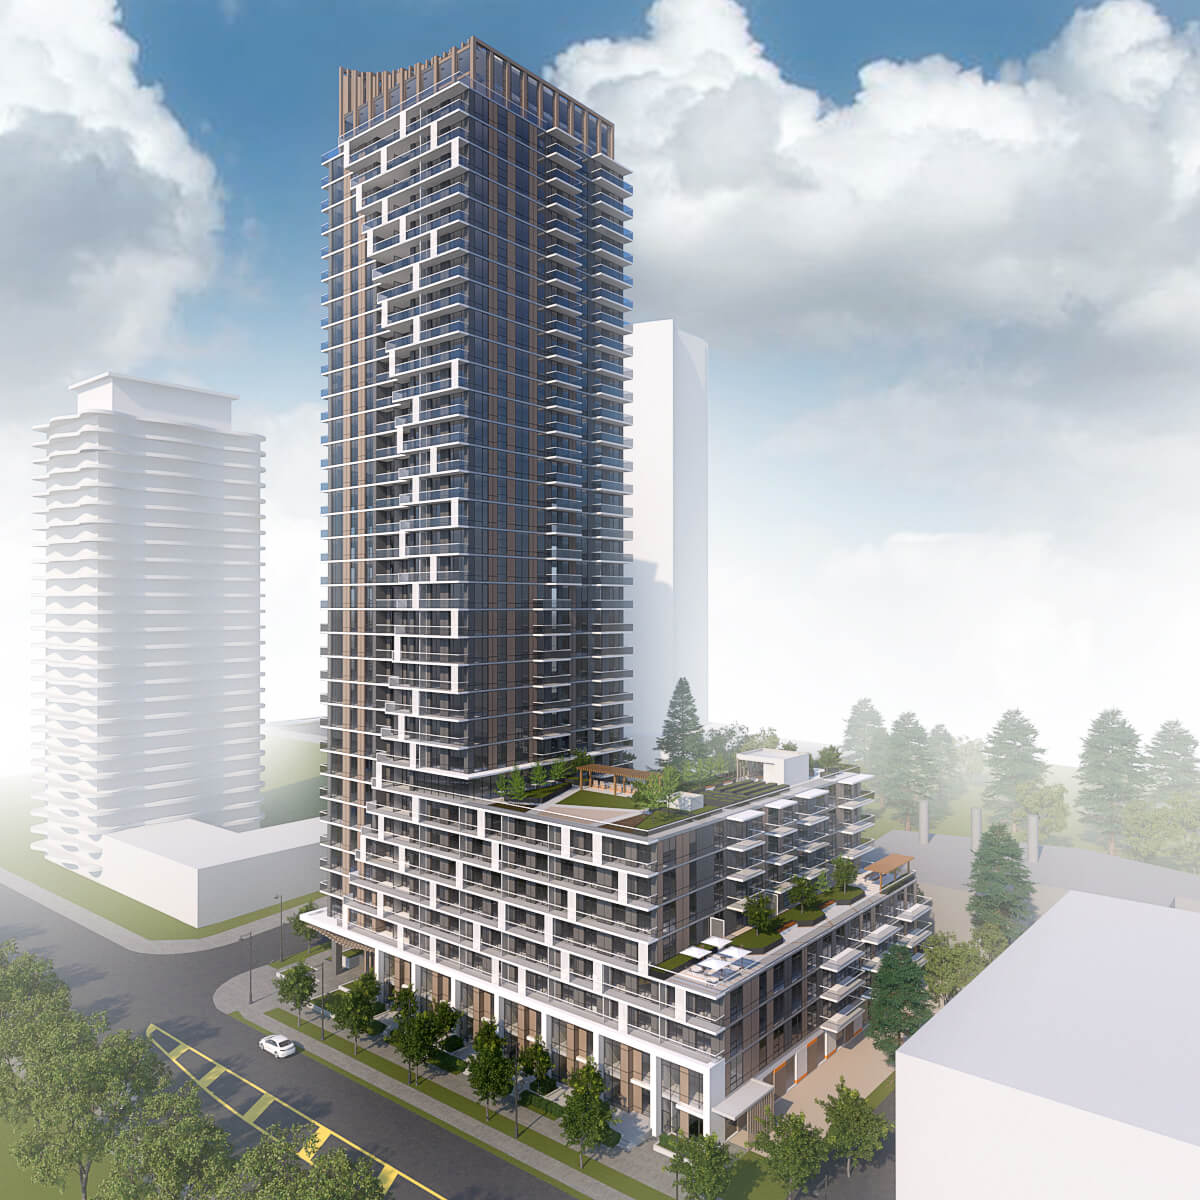 ‘The Sequoia’ development is a mixed-use 36-storey high-rise project located at 133 Street & 104 Avenue, Surrey, British Columbia. Group 161 | DF Architecture | Sequoia, Mixed-Use Development #architecture #project #development #group161 #urbanplanning #highrise